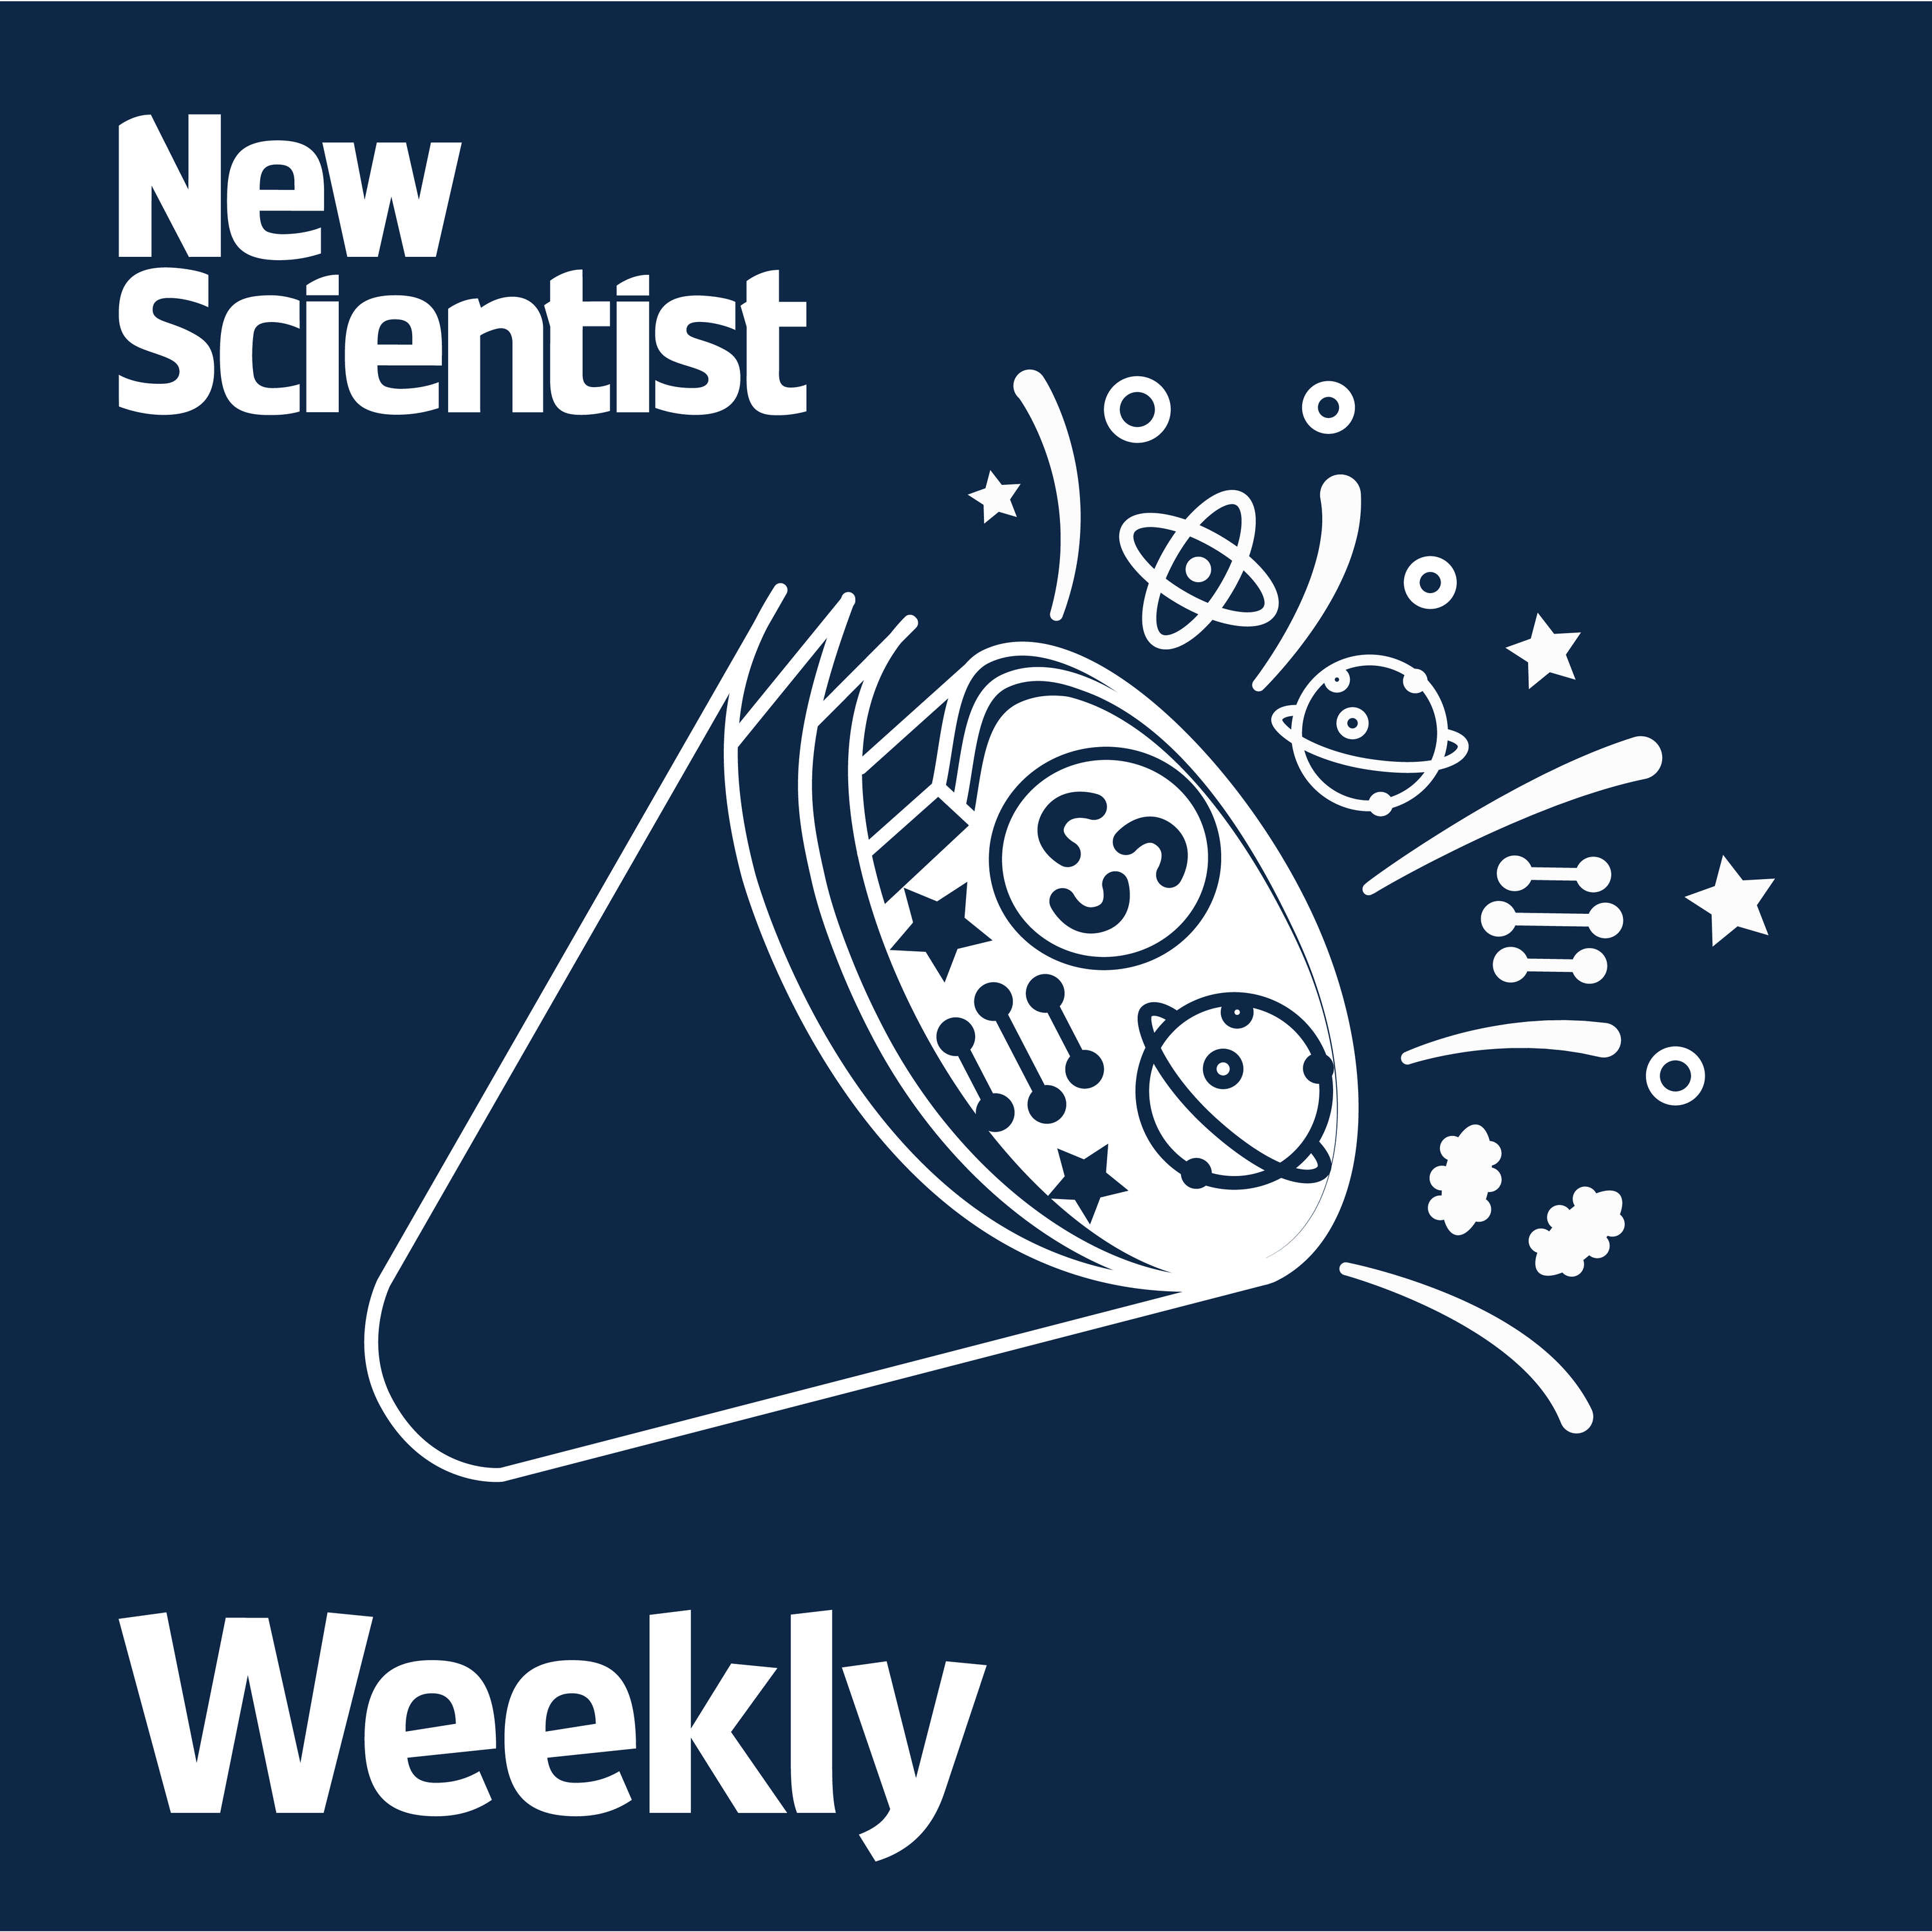 New Scientist Weekly podcast